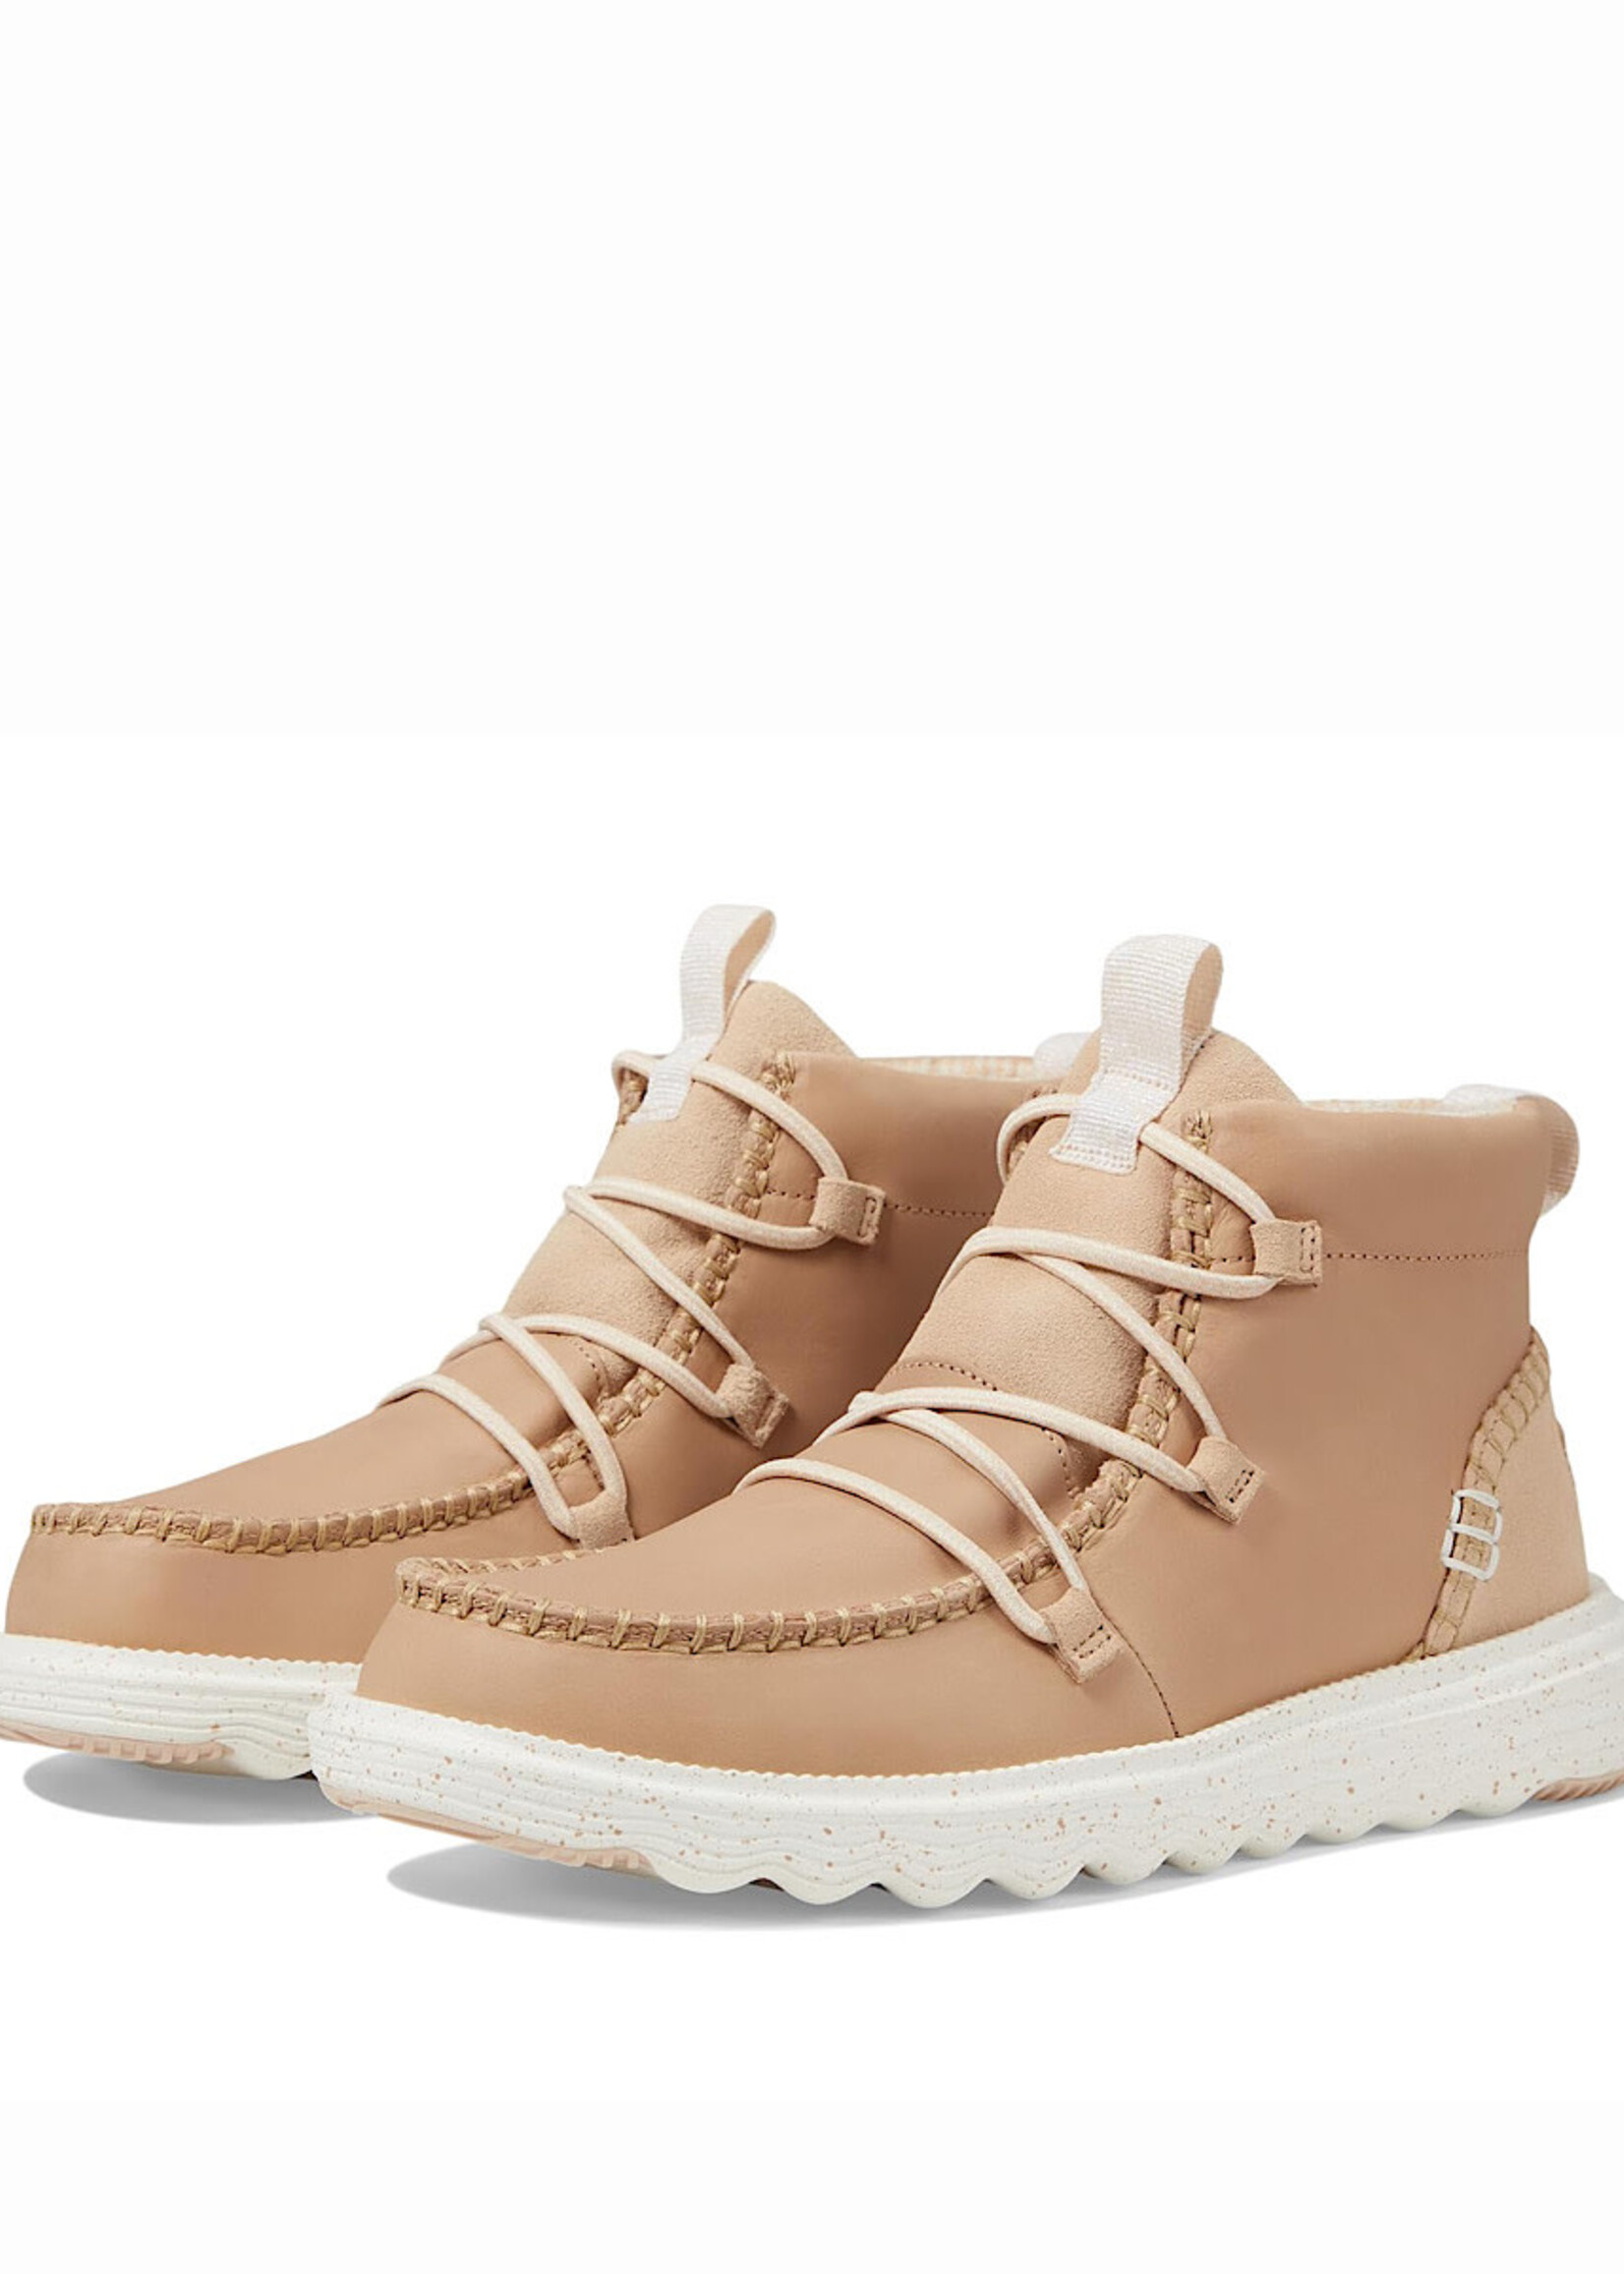 Hey Dude Hey Dude Reyes Boot Leather Taupe